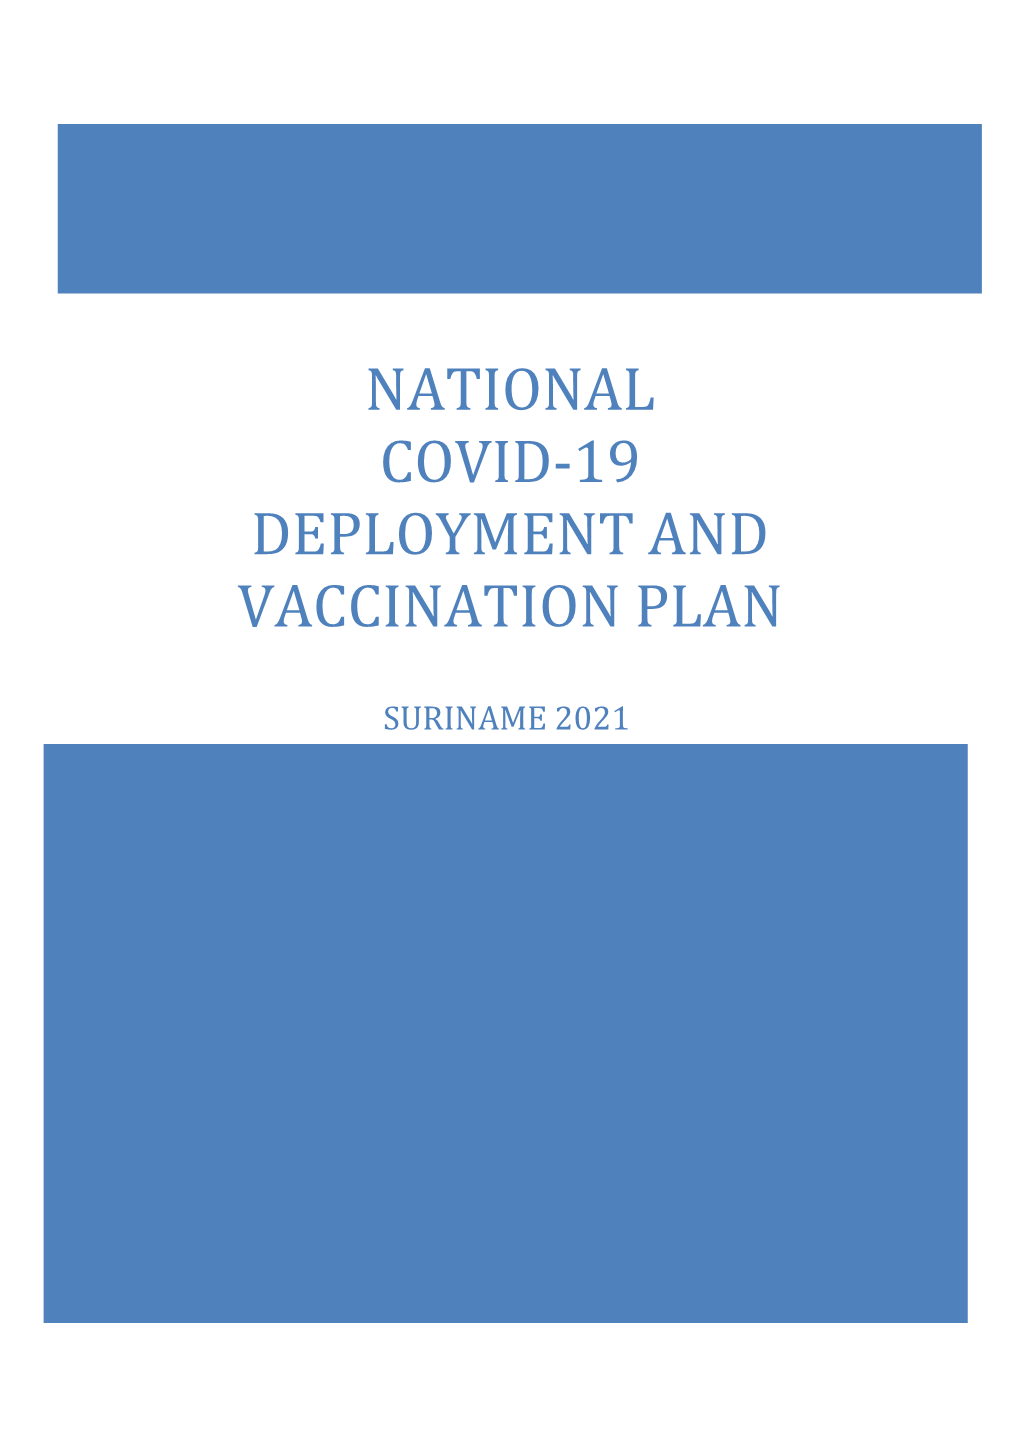 National Covid-19 Deployment and Vaccination Plan